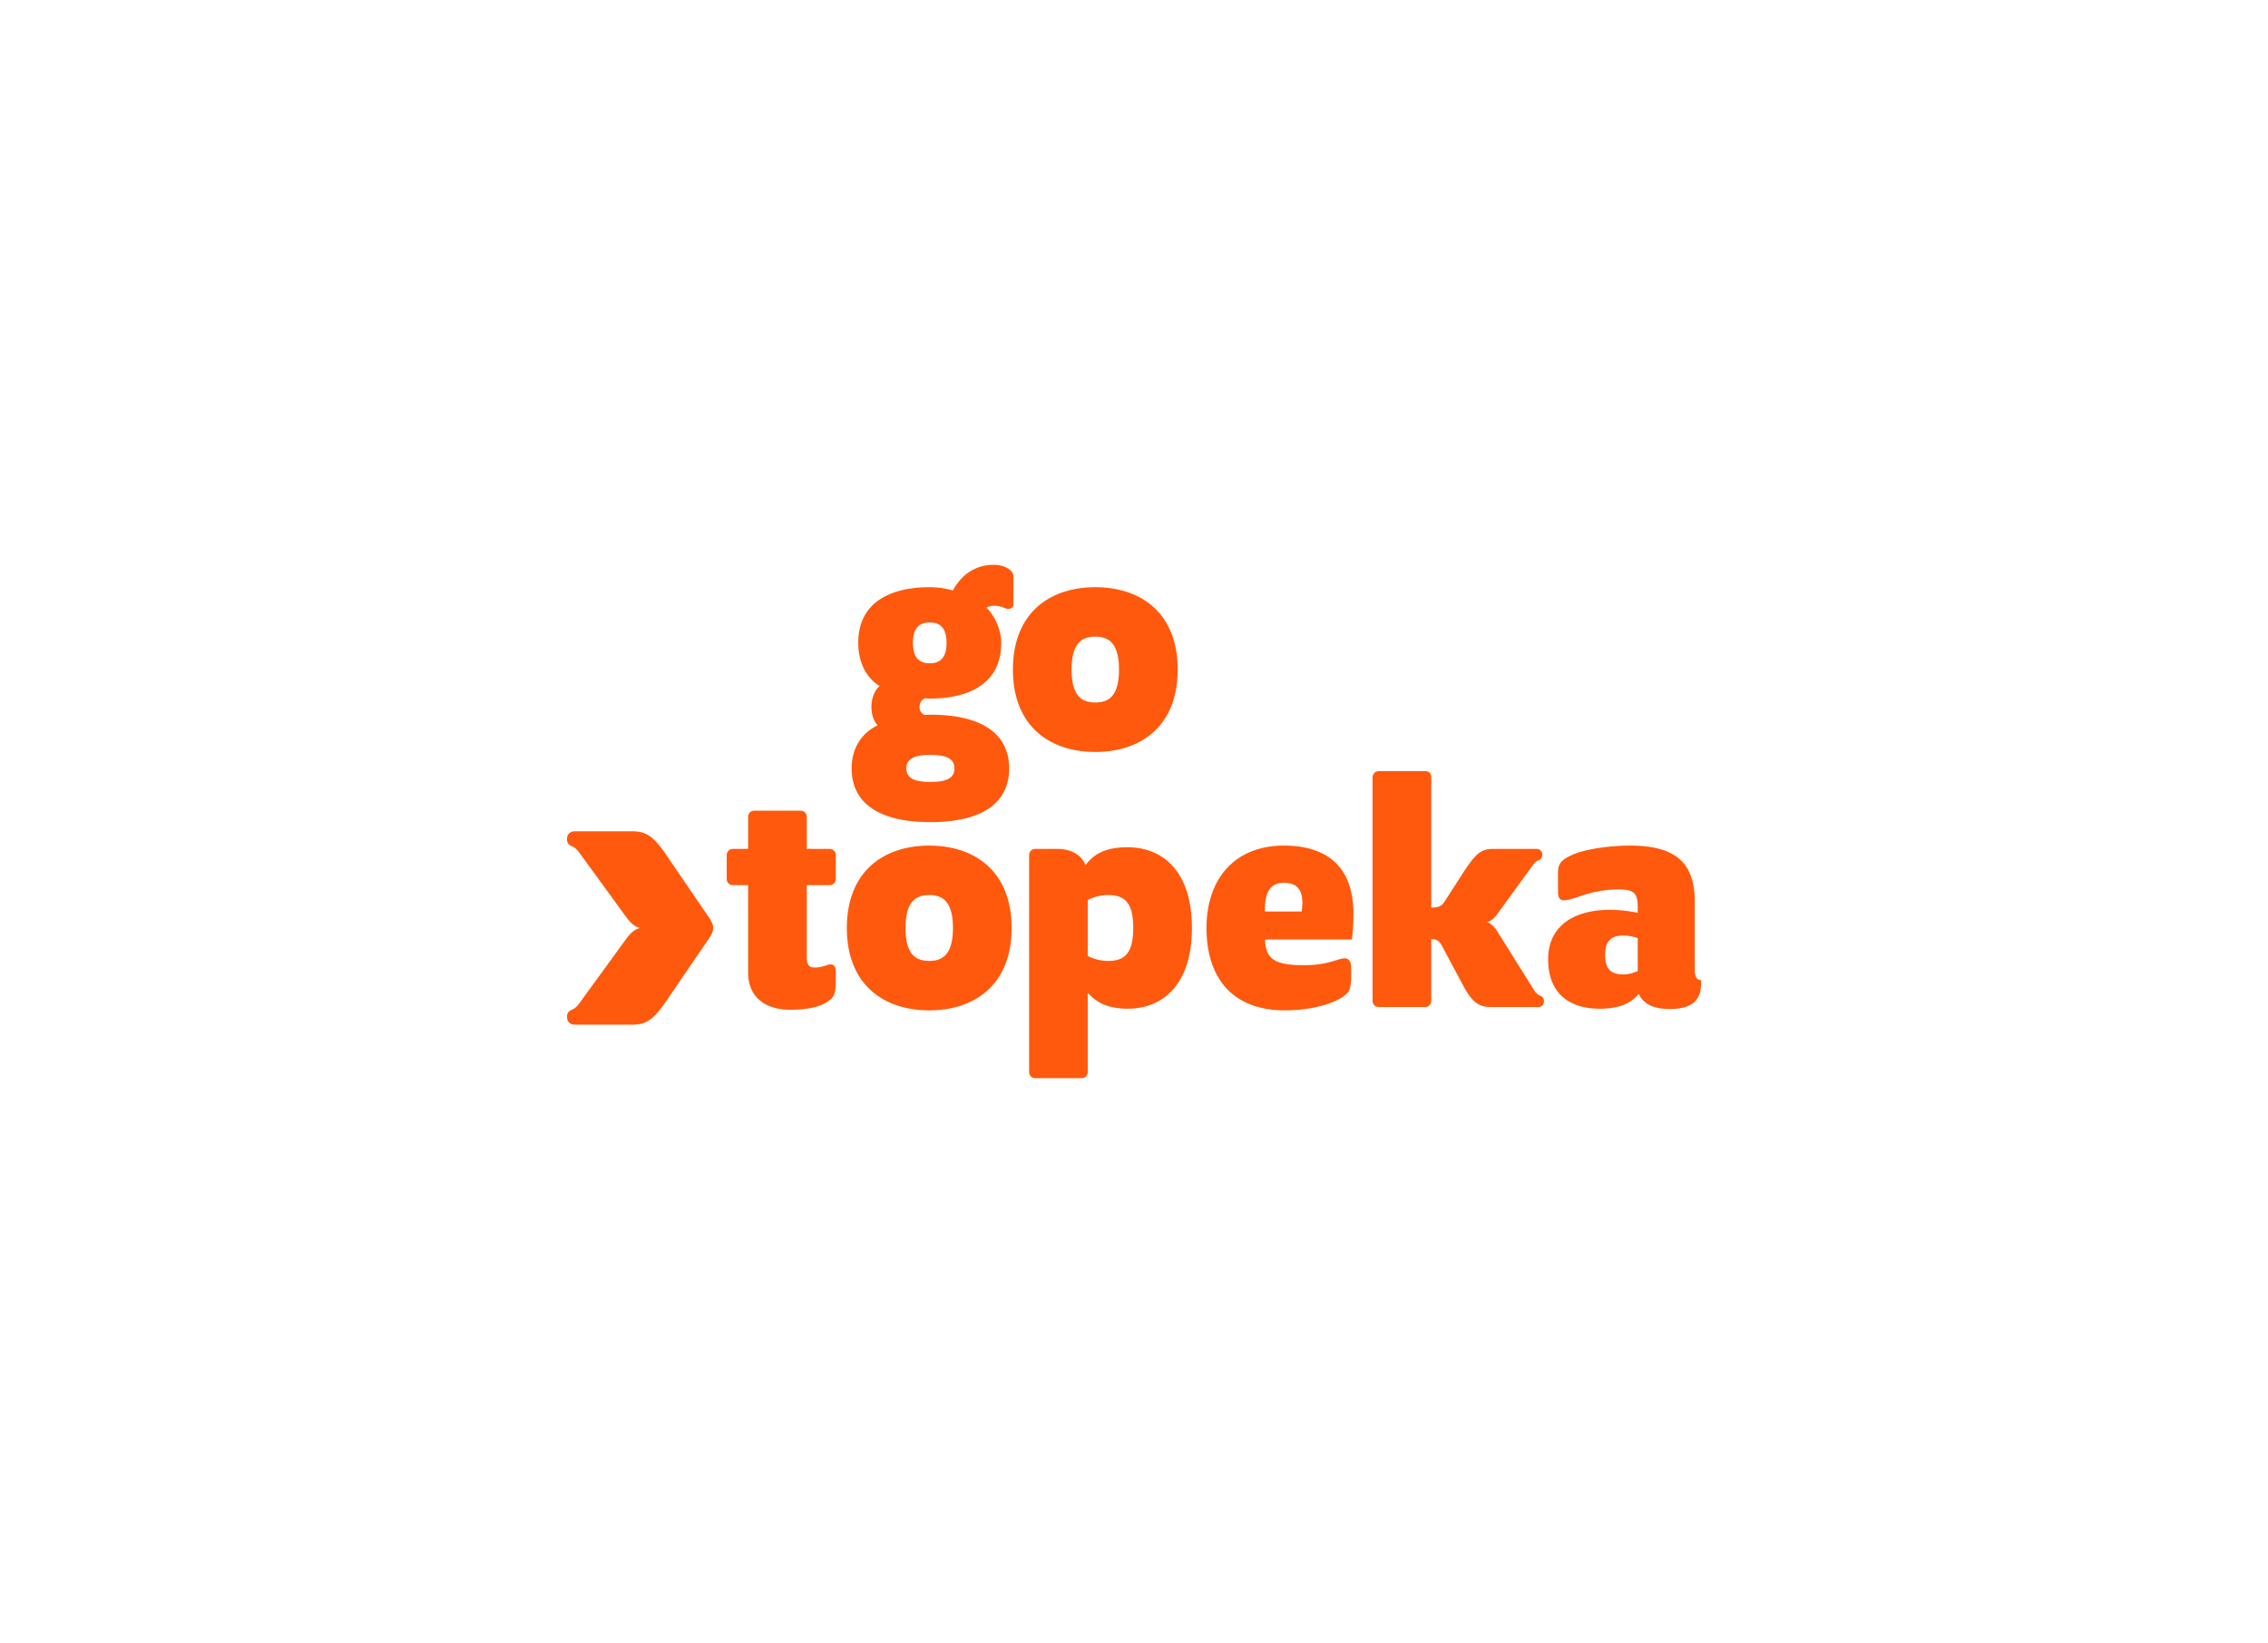 GO Topeka creates county-wide economic success through the implementation of an aggressive economic development strategy that capitalizes on the unique strengths of the community.